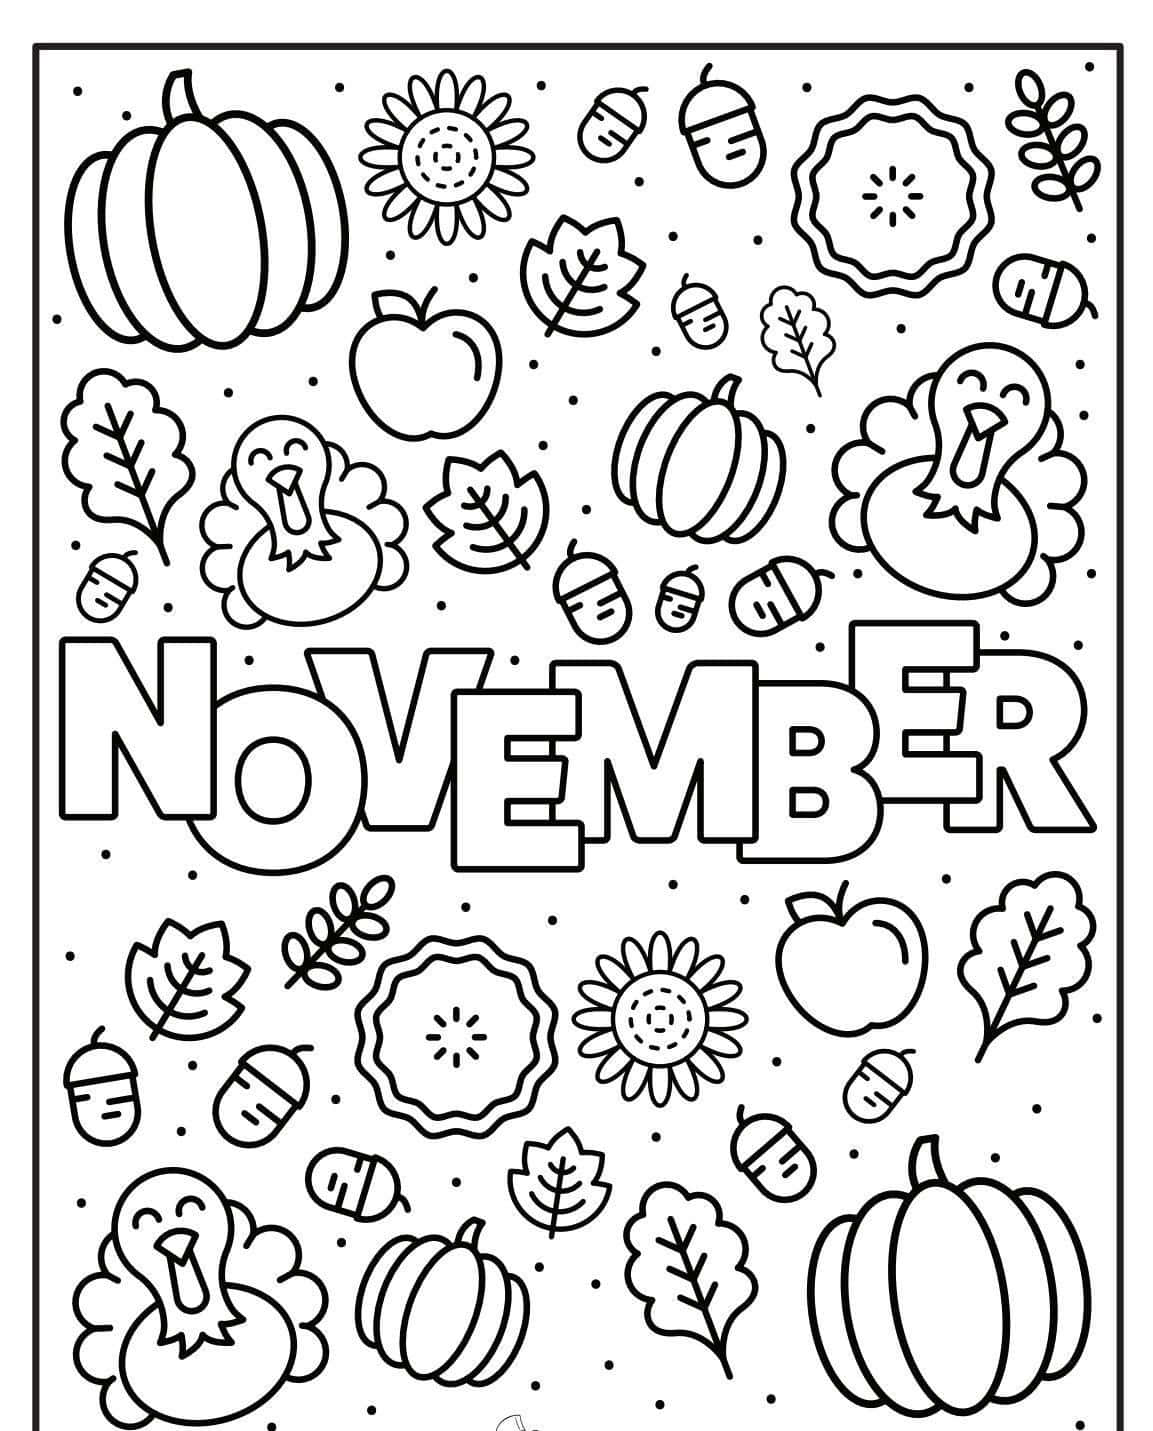 November Coloring Pages For Kids